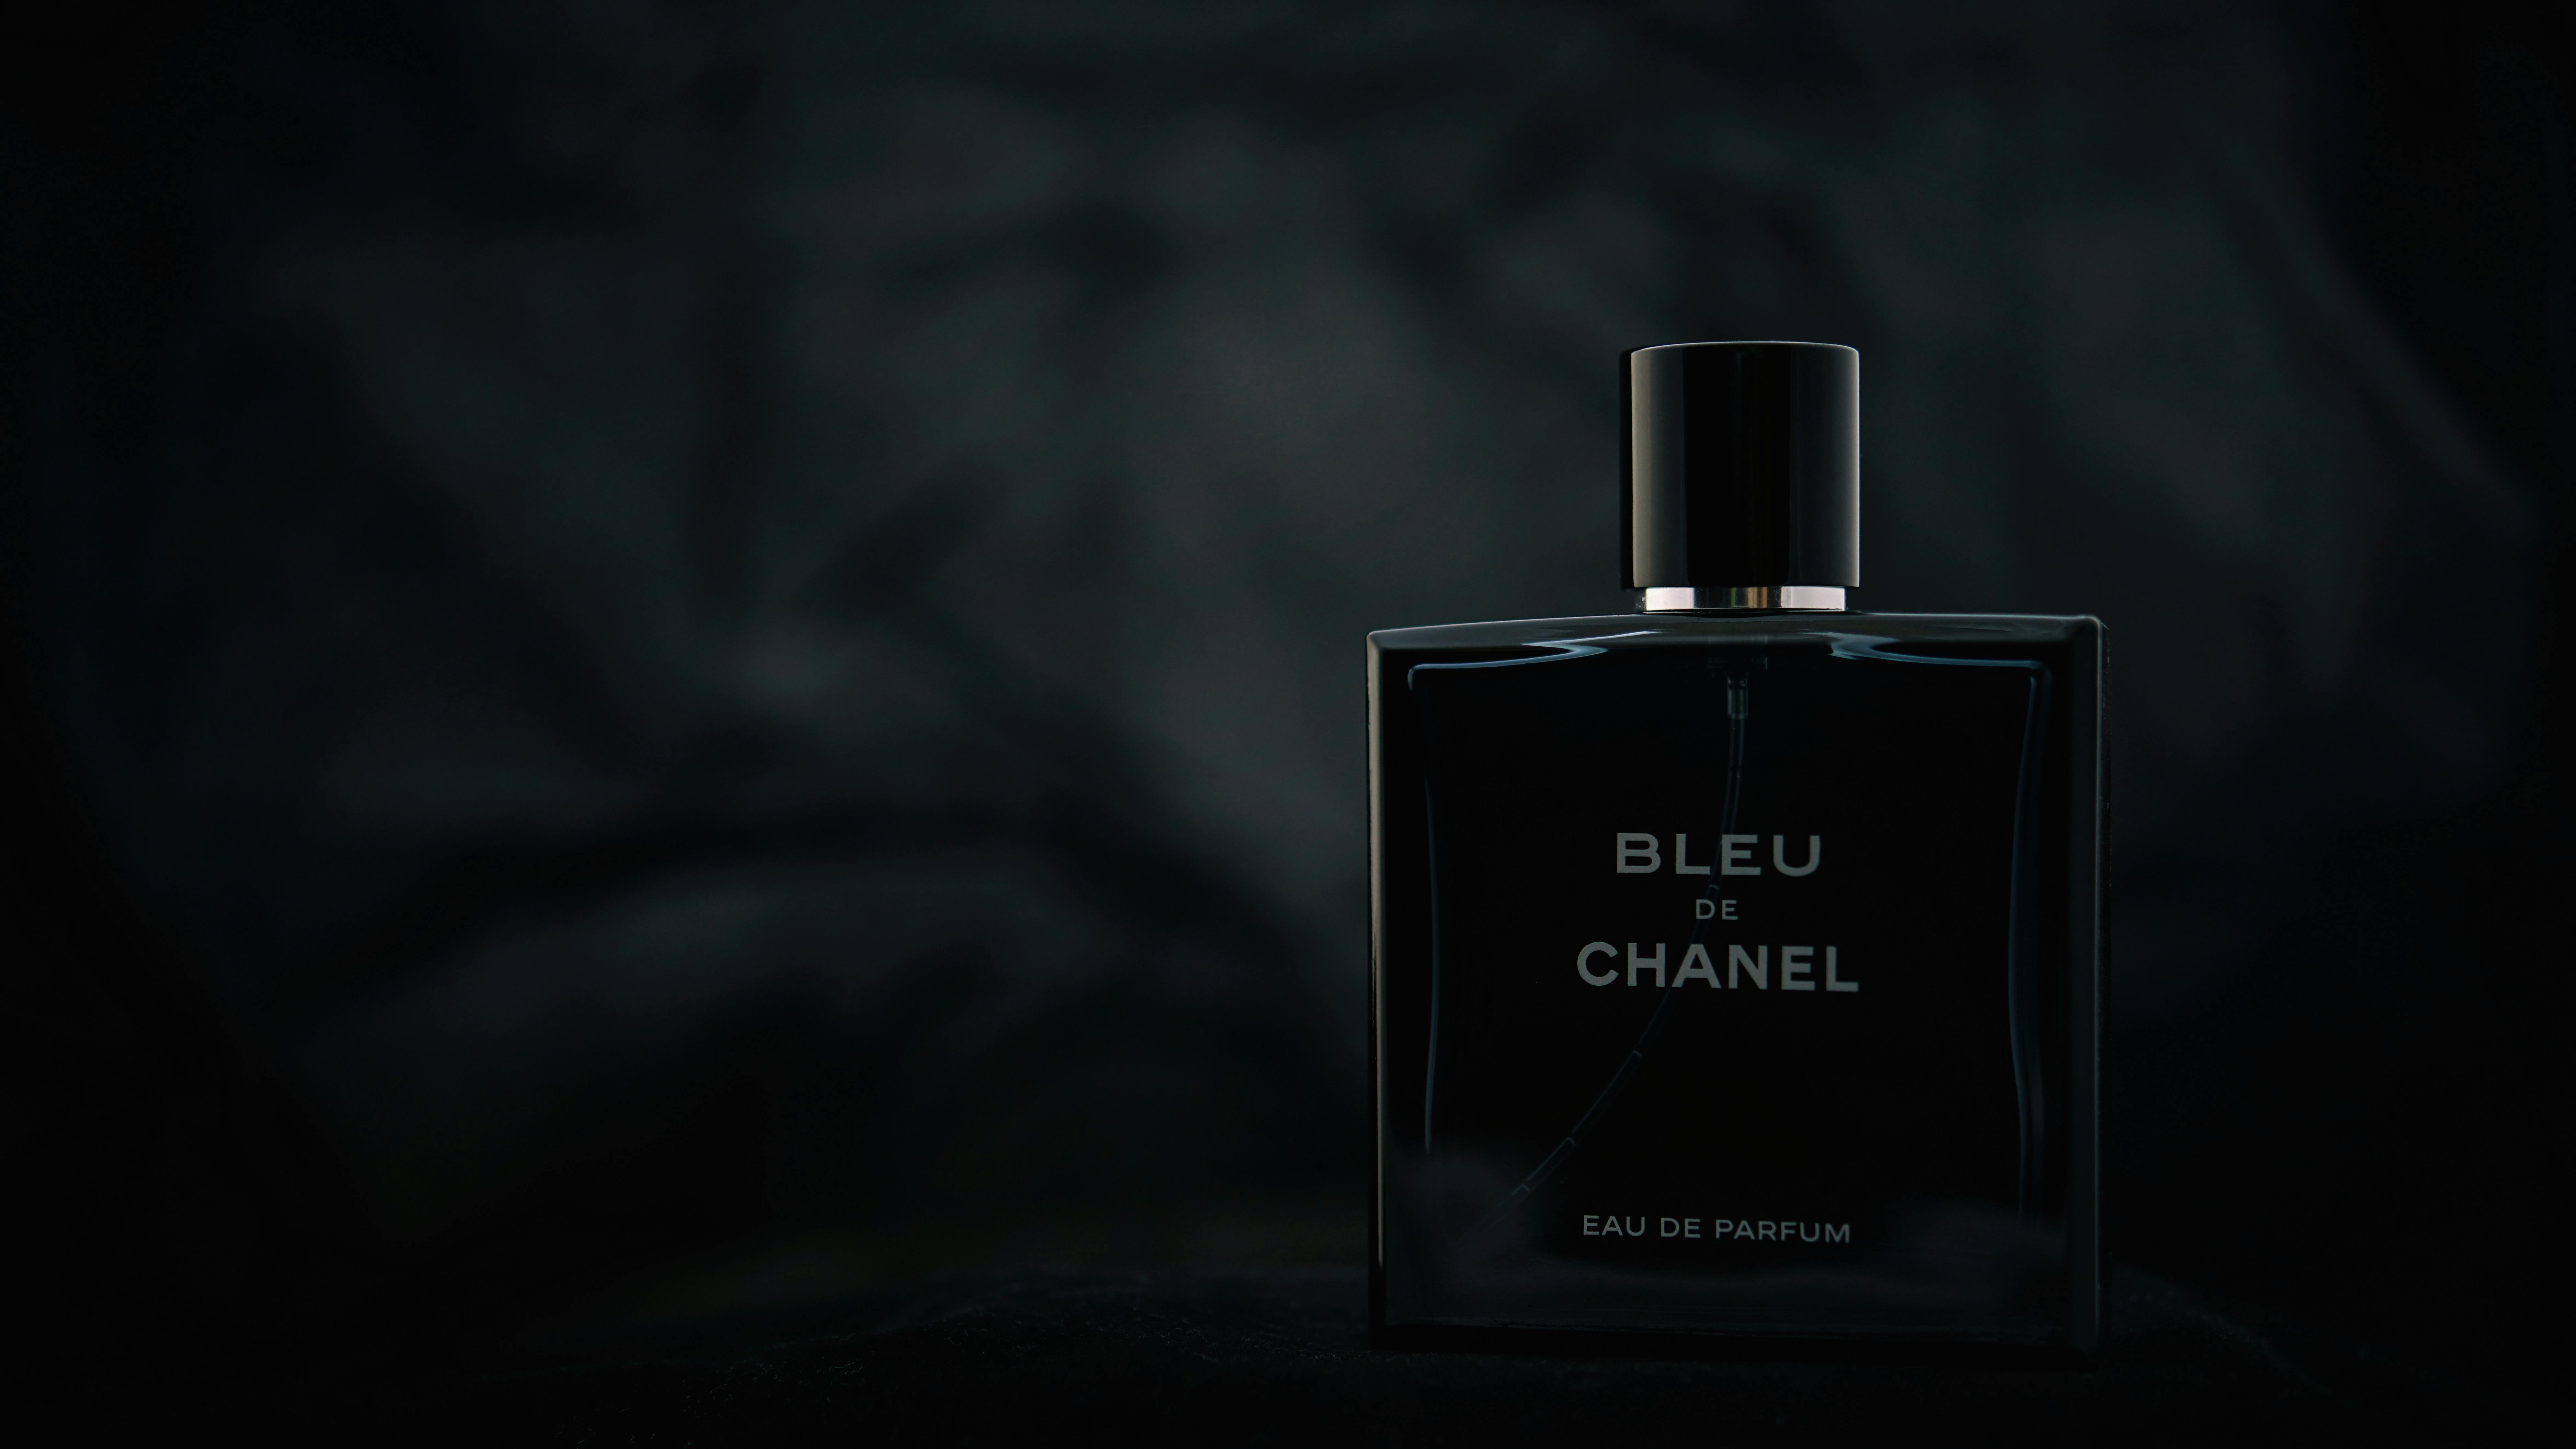 Chanel Perfume Bottle in Close-up Photography · Free Stock Photo